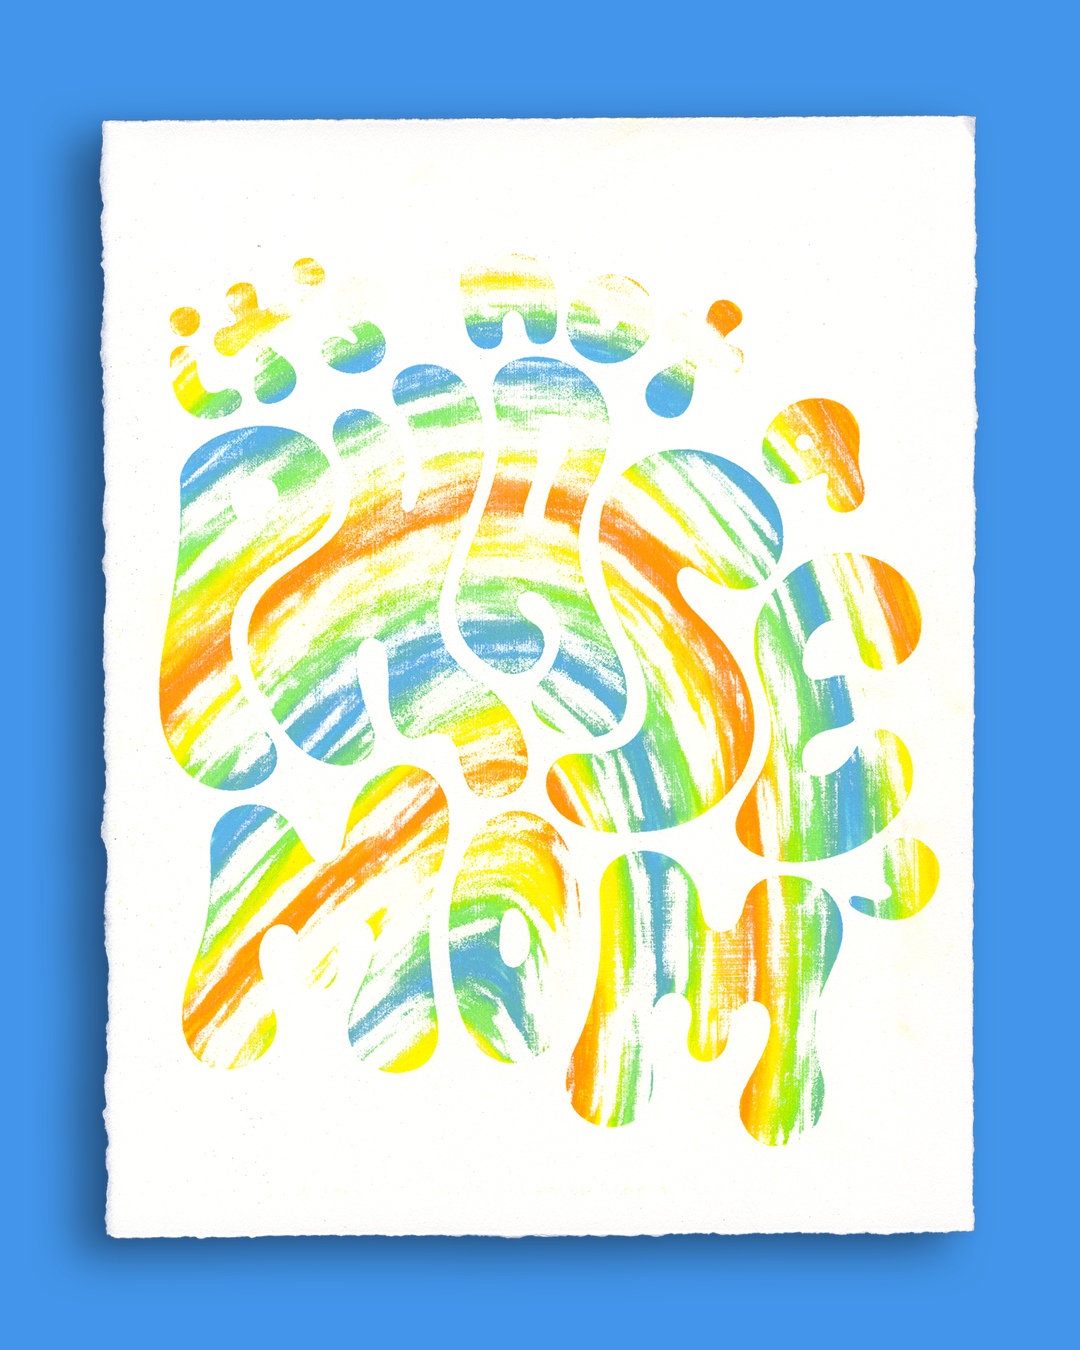 A new print of the same design but in an arc-shaped gradient of orange, yellow, green, and blue. The type is chalky and has a lot of white space, making it less legible.